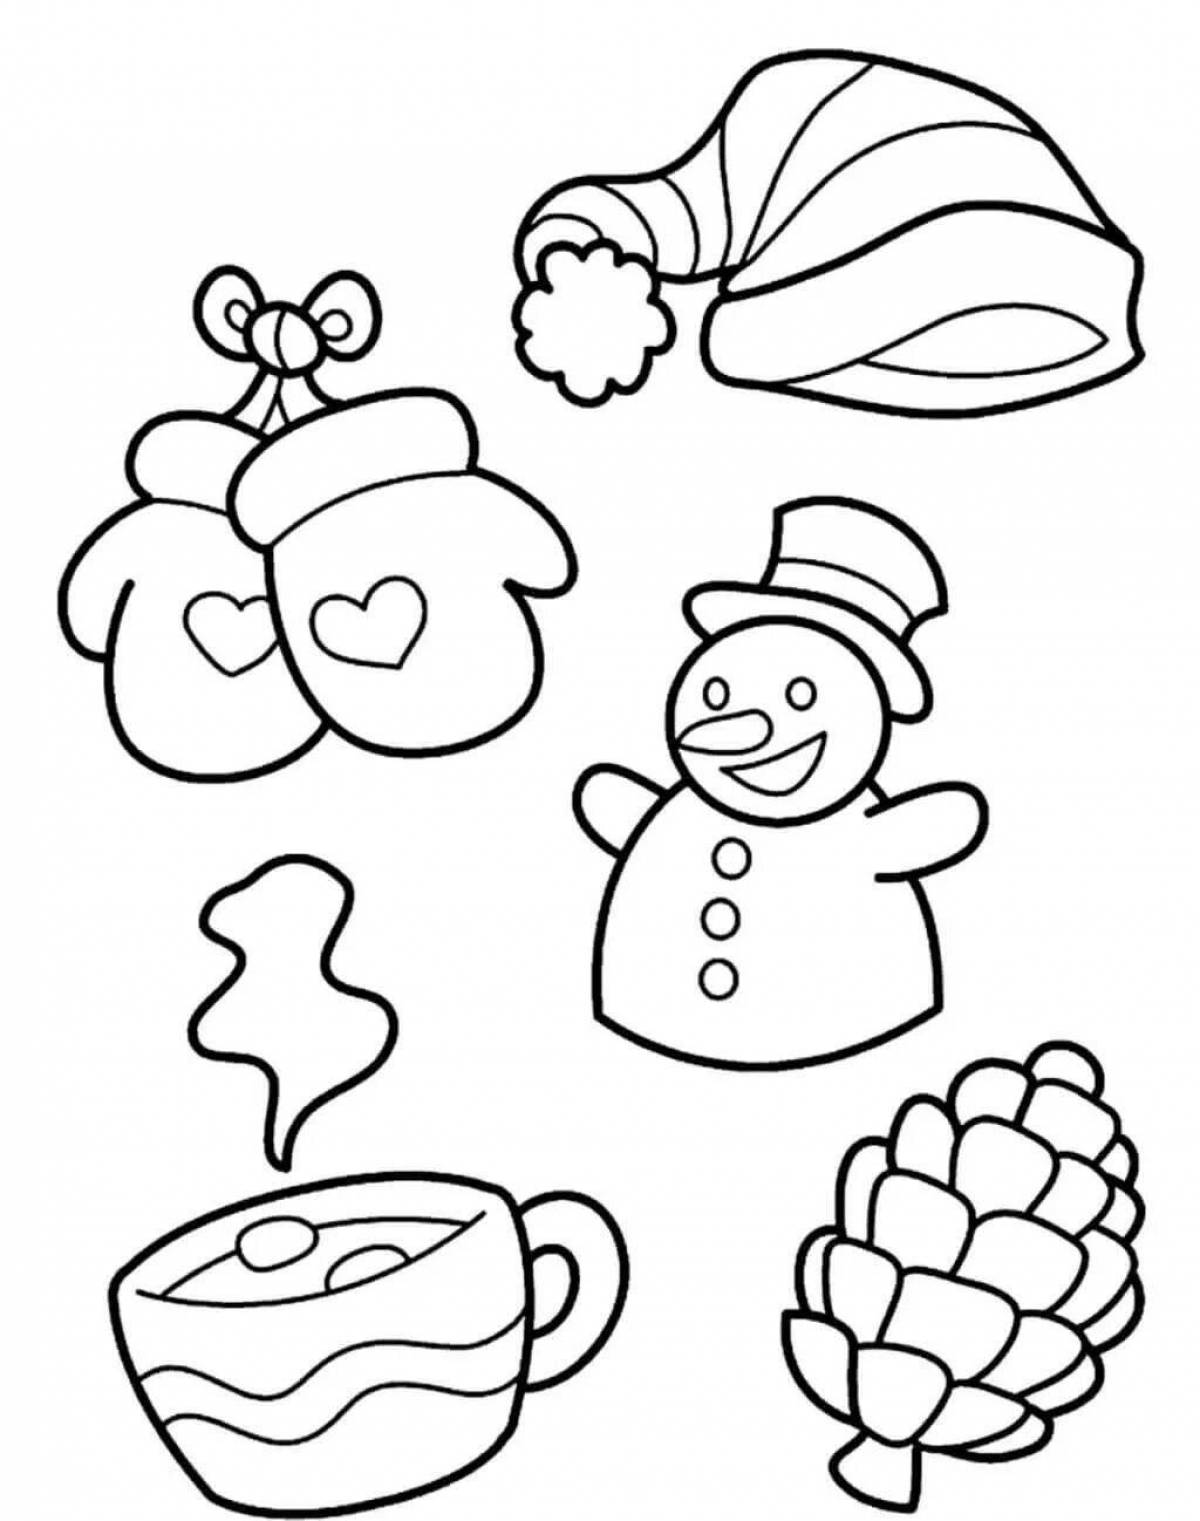 Fascinating coloring page 3 4 years winter